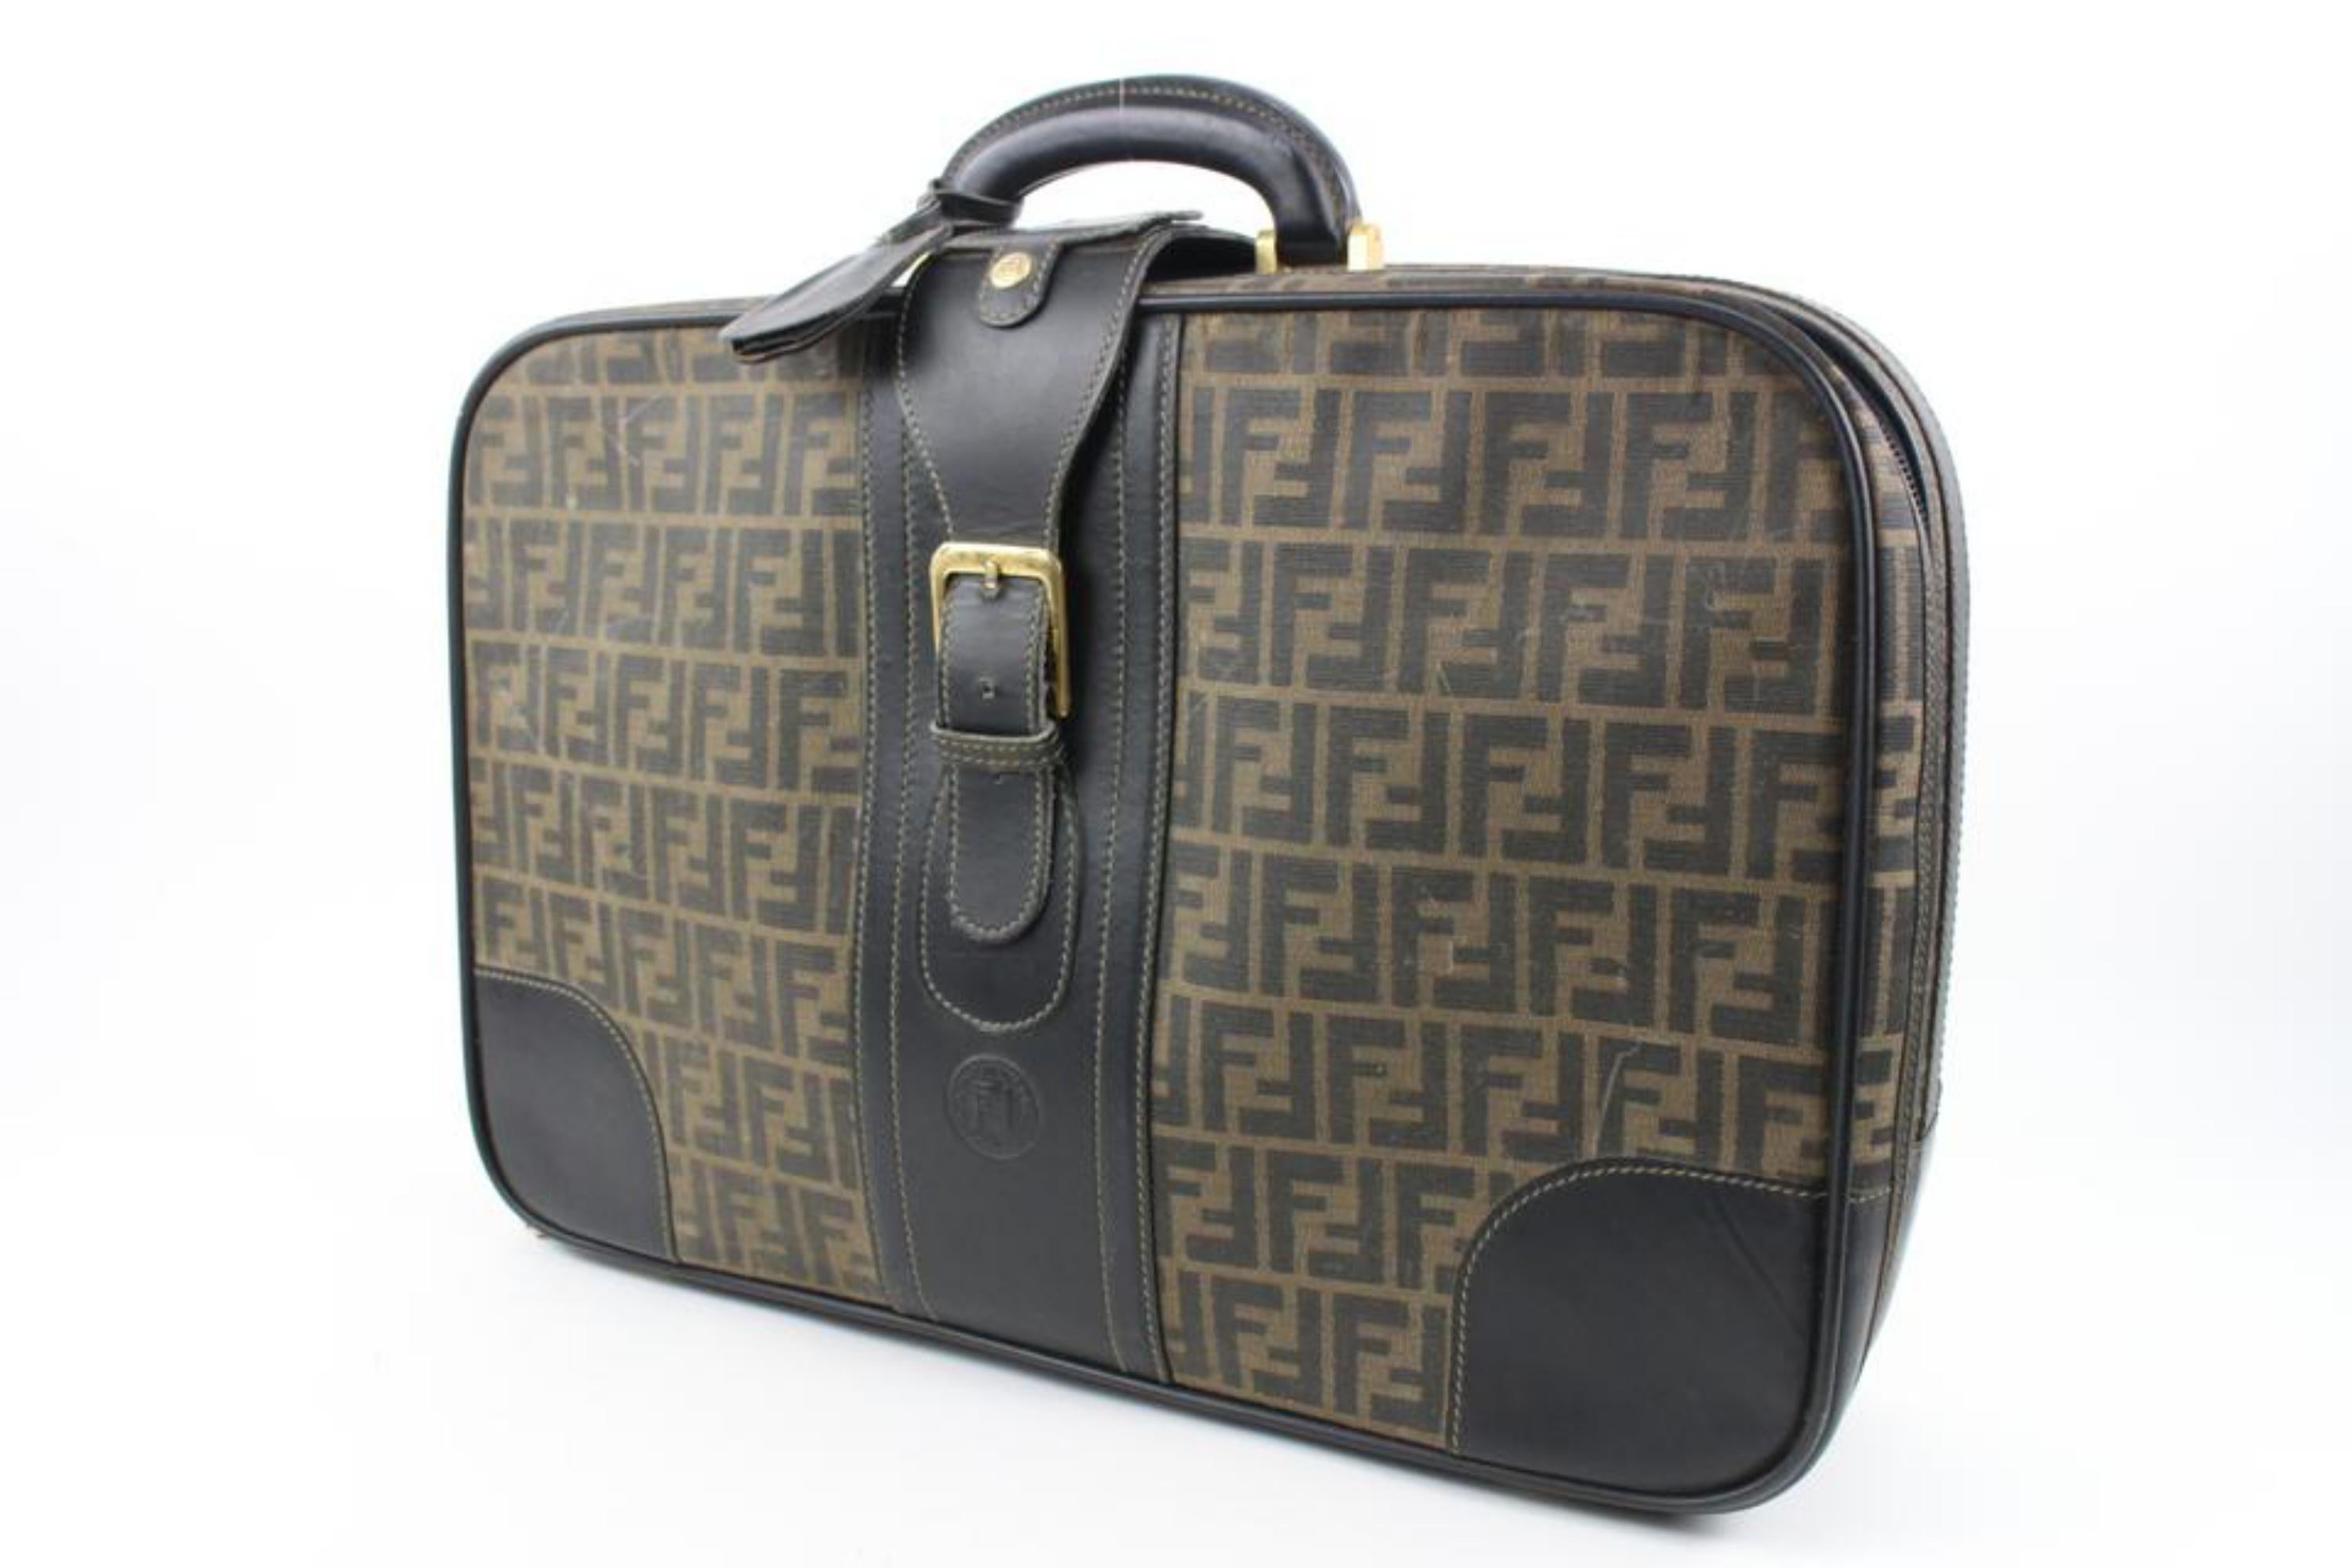 Fendi Brown Monogram FF Zucca Trunk Luggage Suitcase 119f10
Date Code/Serial Number: 940-801192
Made In: Italy
Measurements: Length:  20